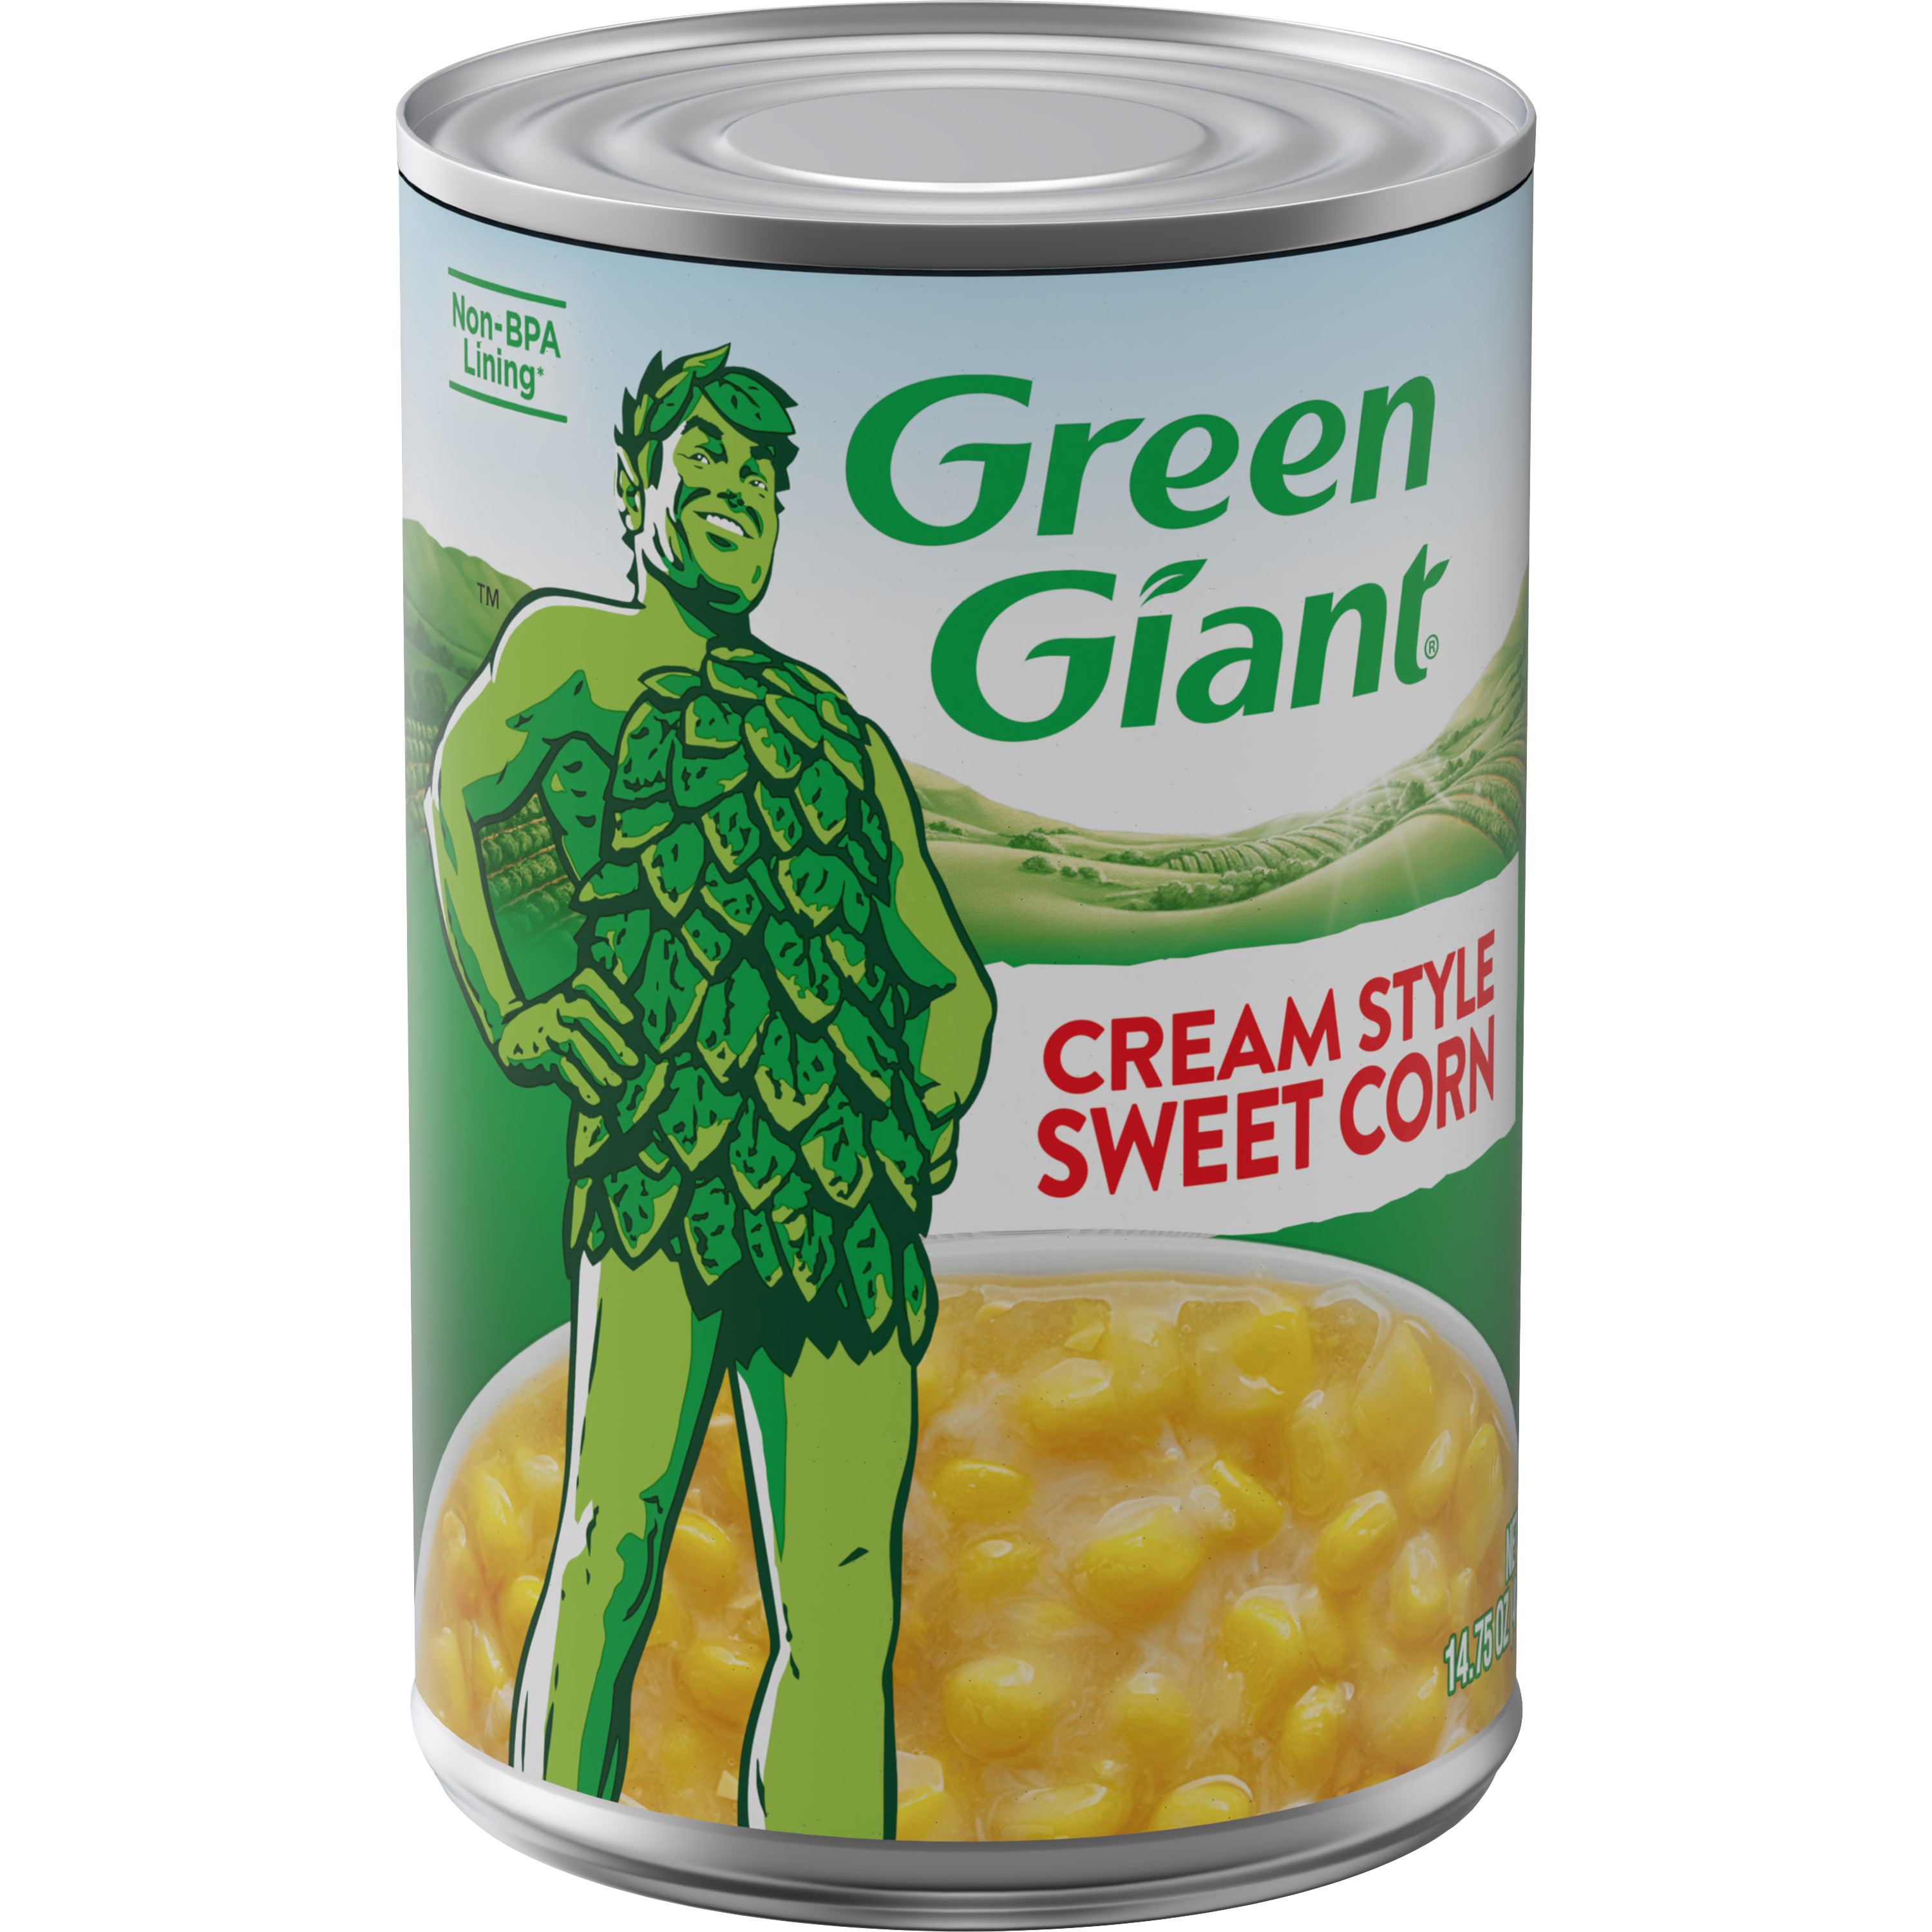 Creamed corn from Green Giant - Cream Style Sweet Corn for a delicious family side dish every time!